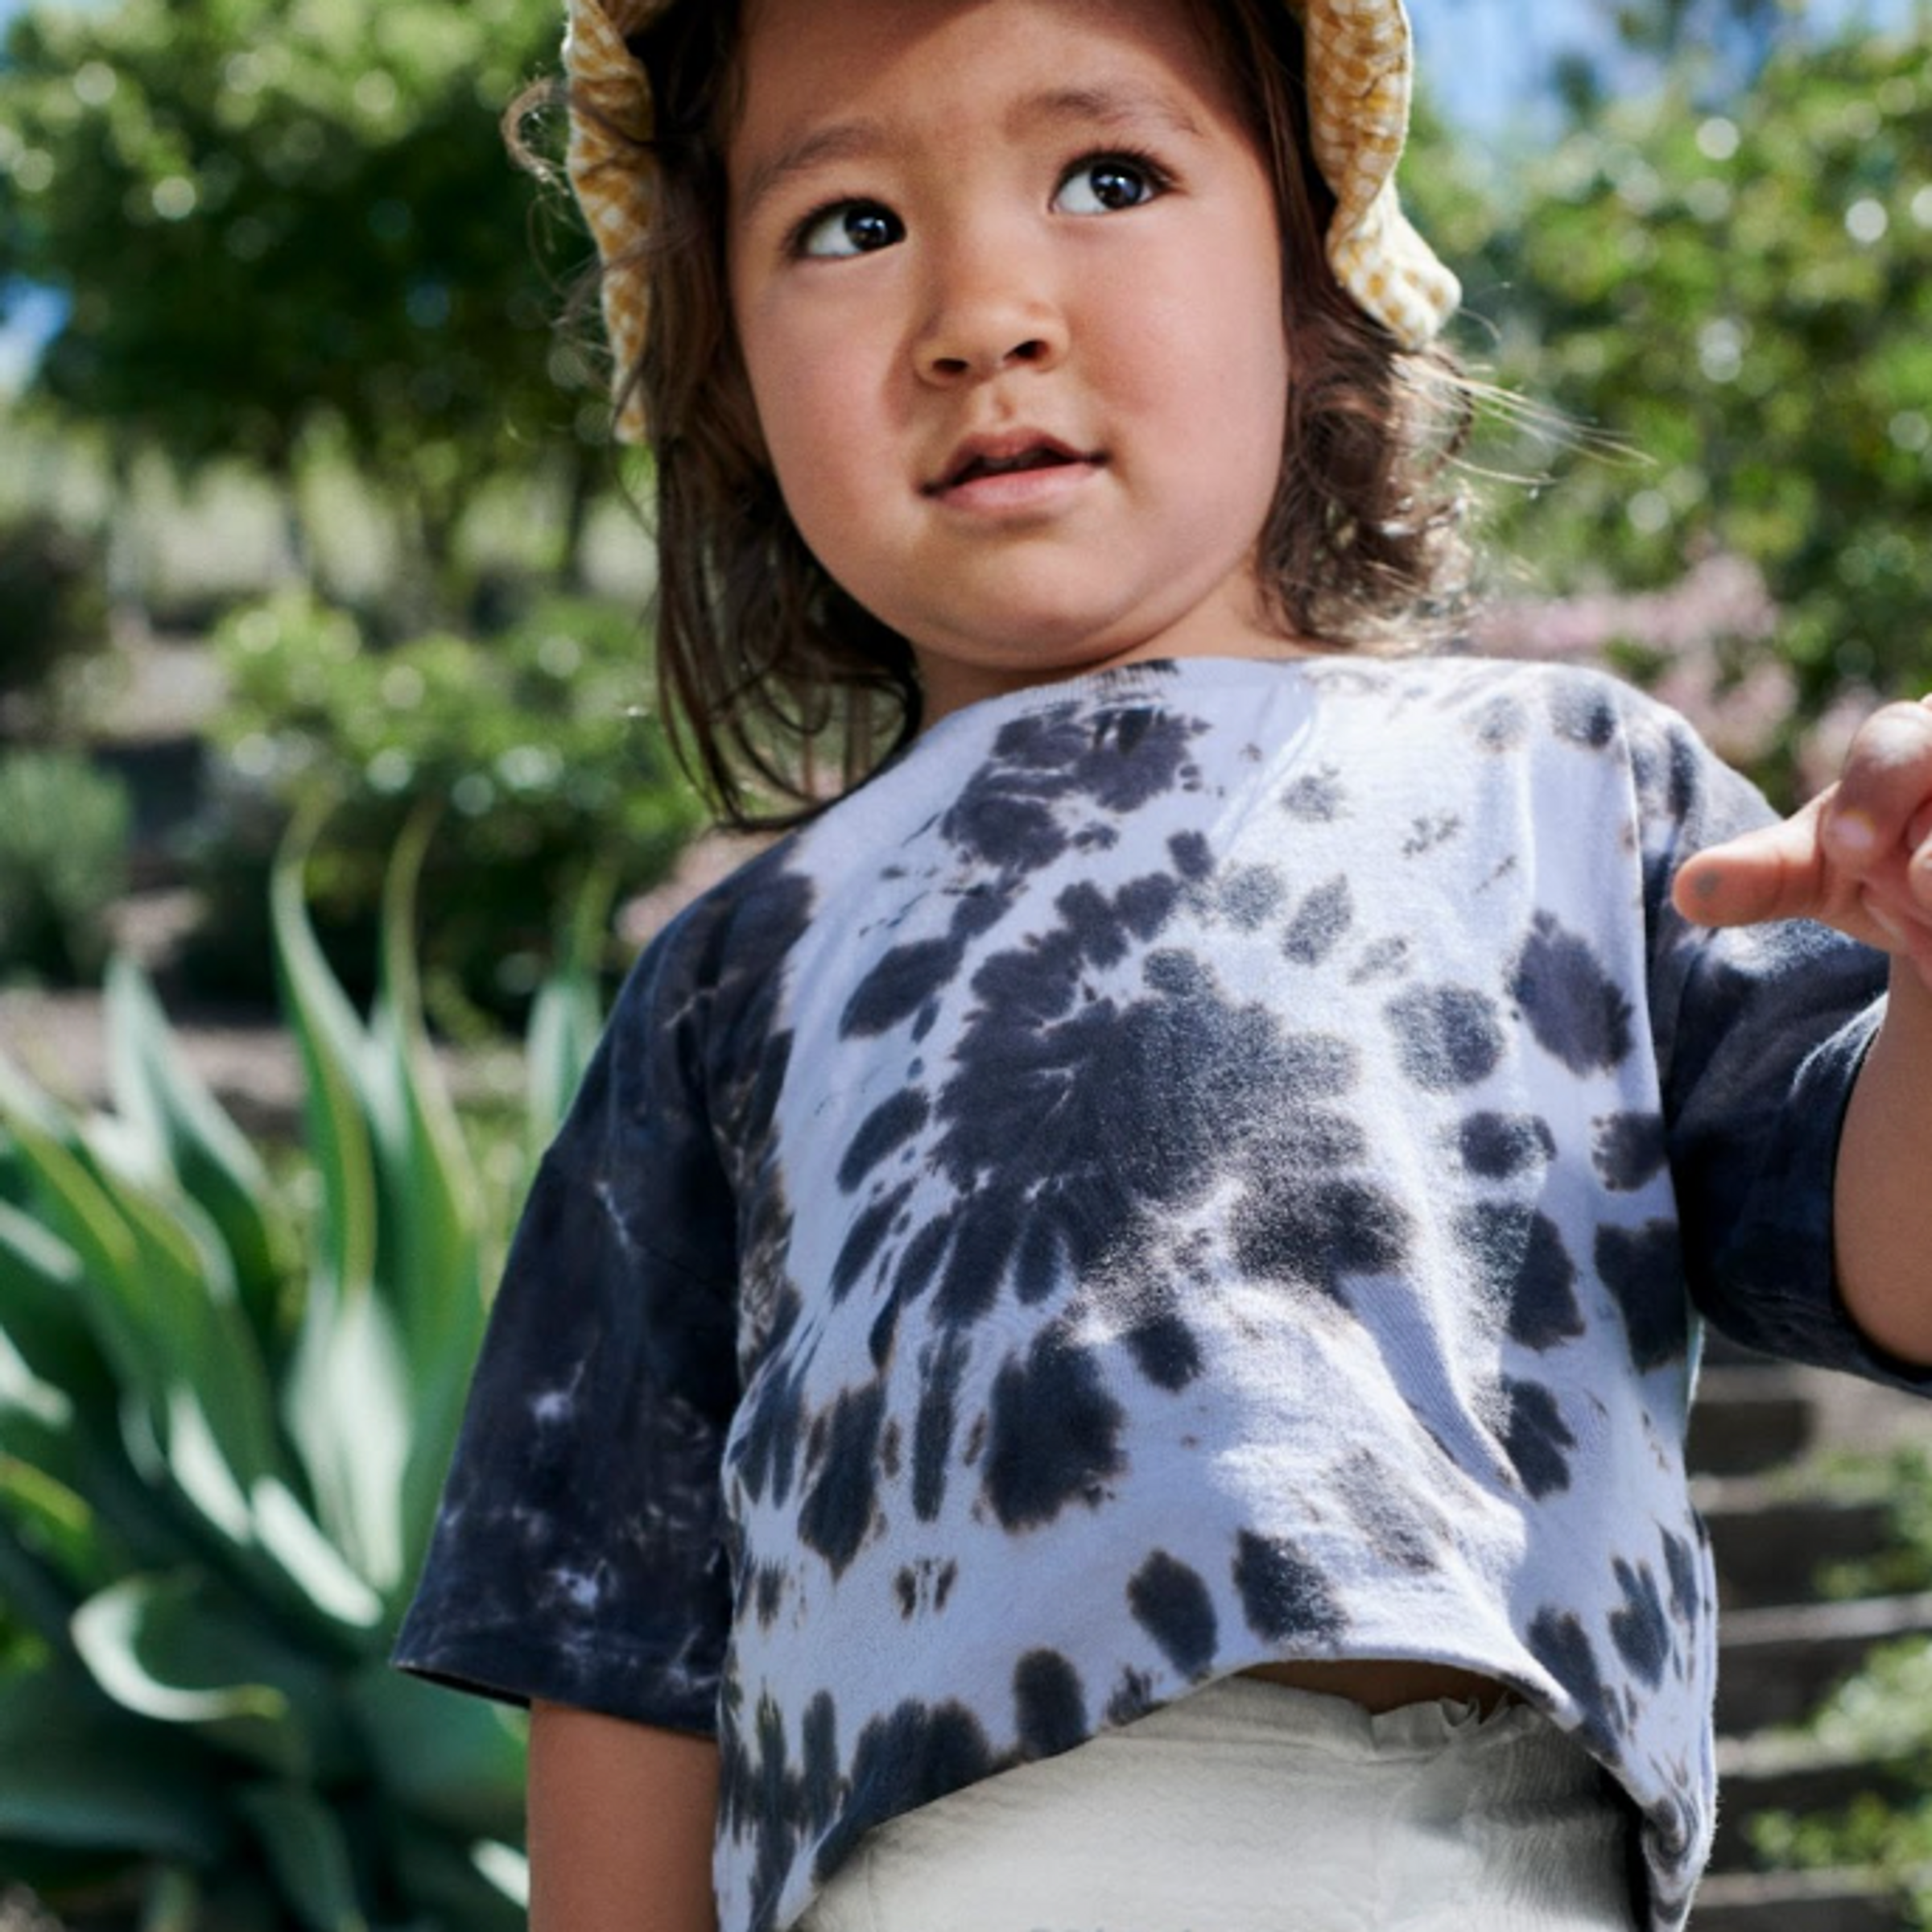 a young boy is seen outside wearing a blue tie-dye shirt and Coterie diaper.